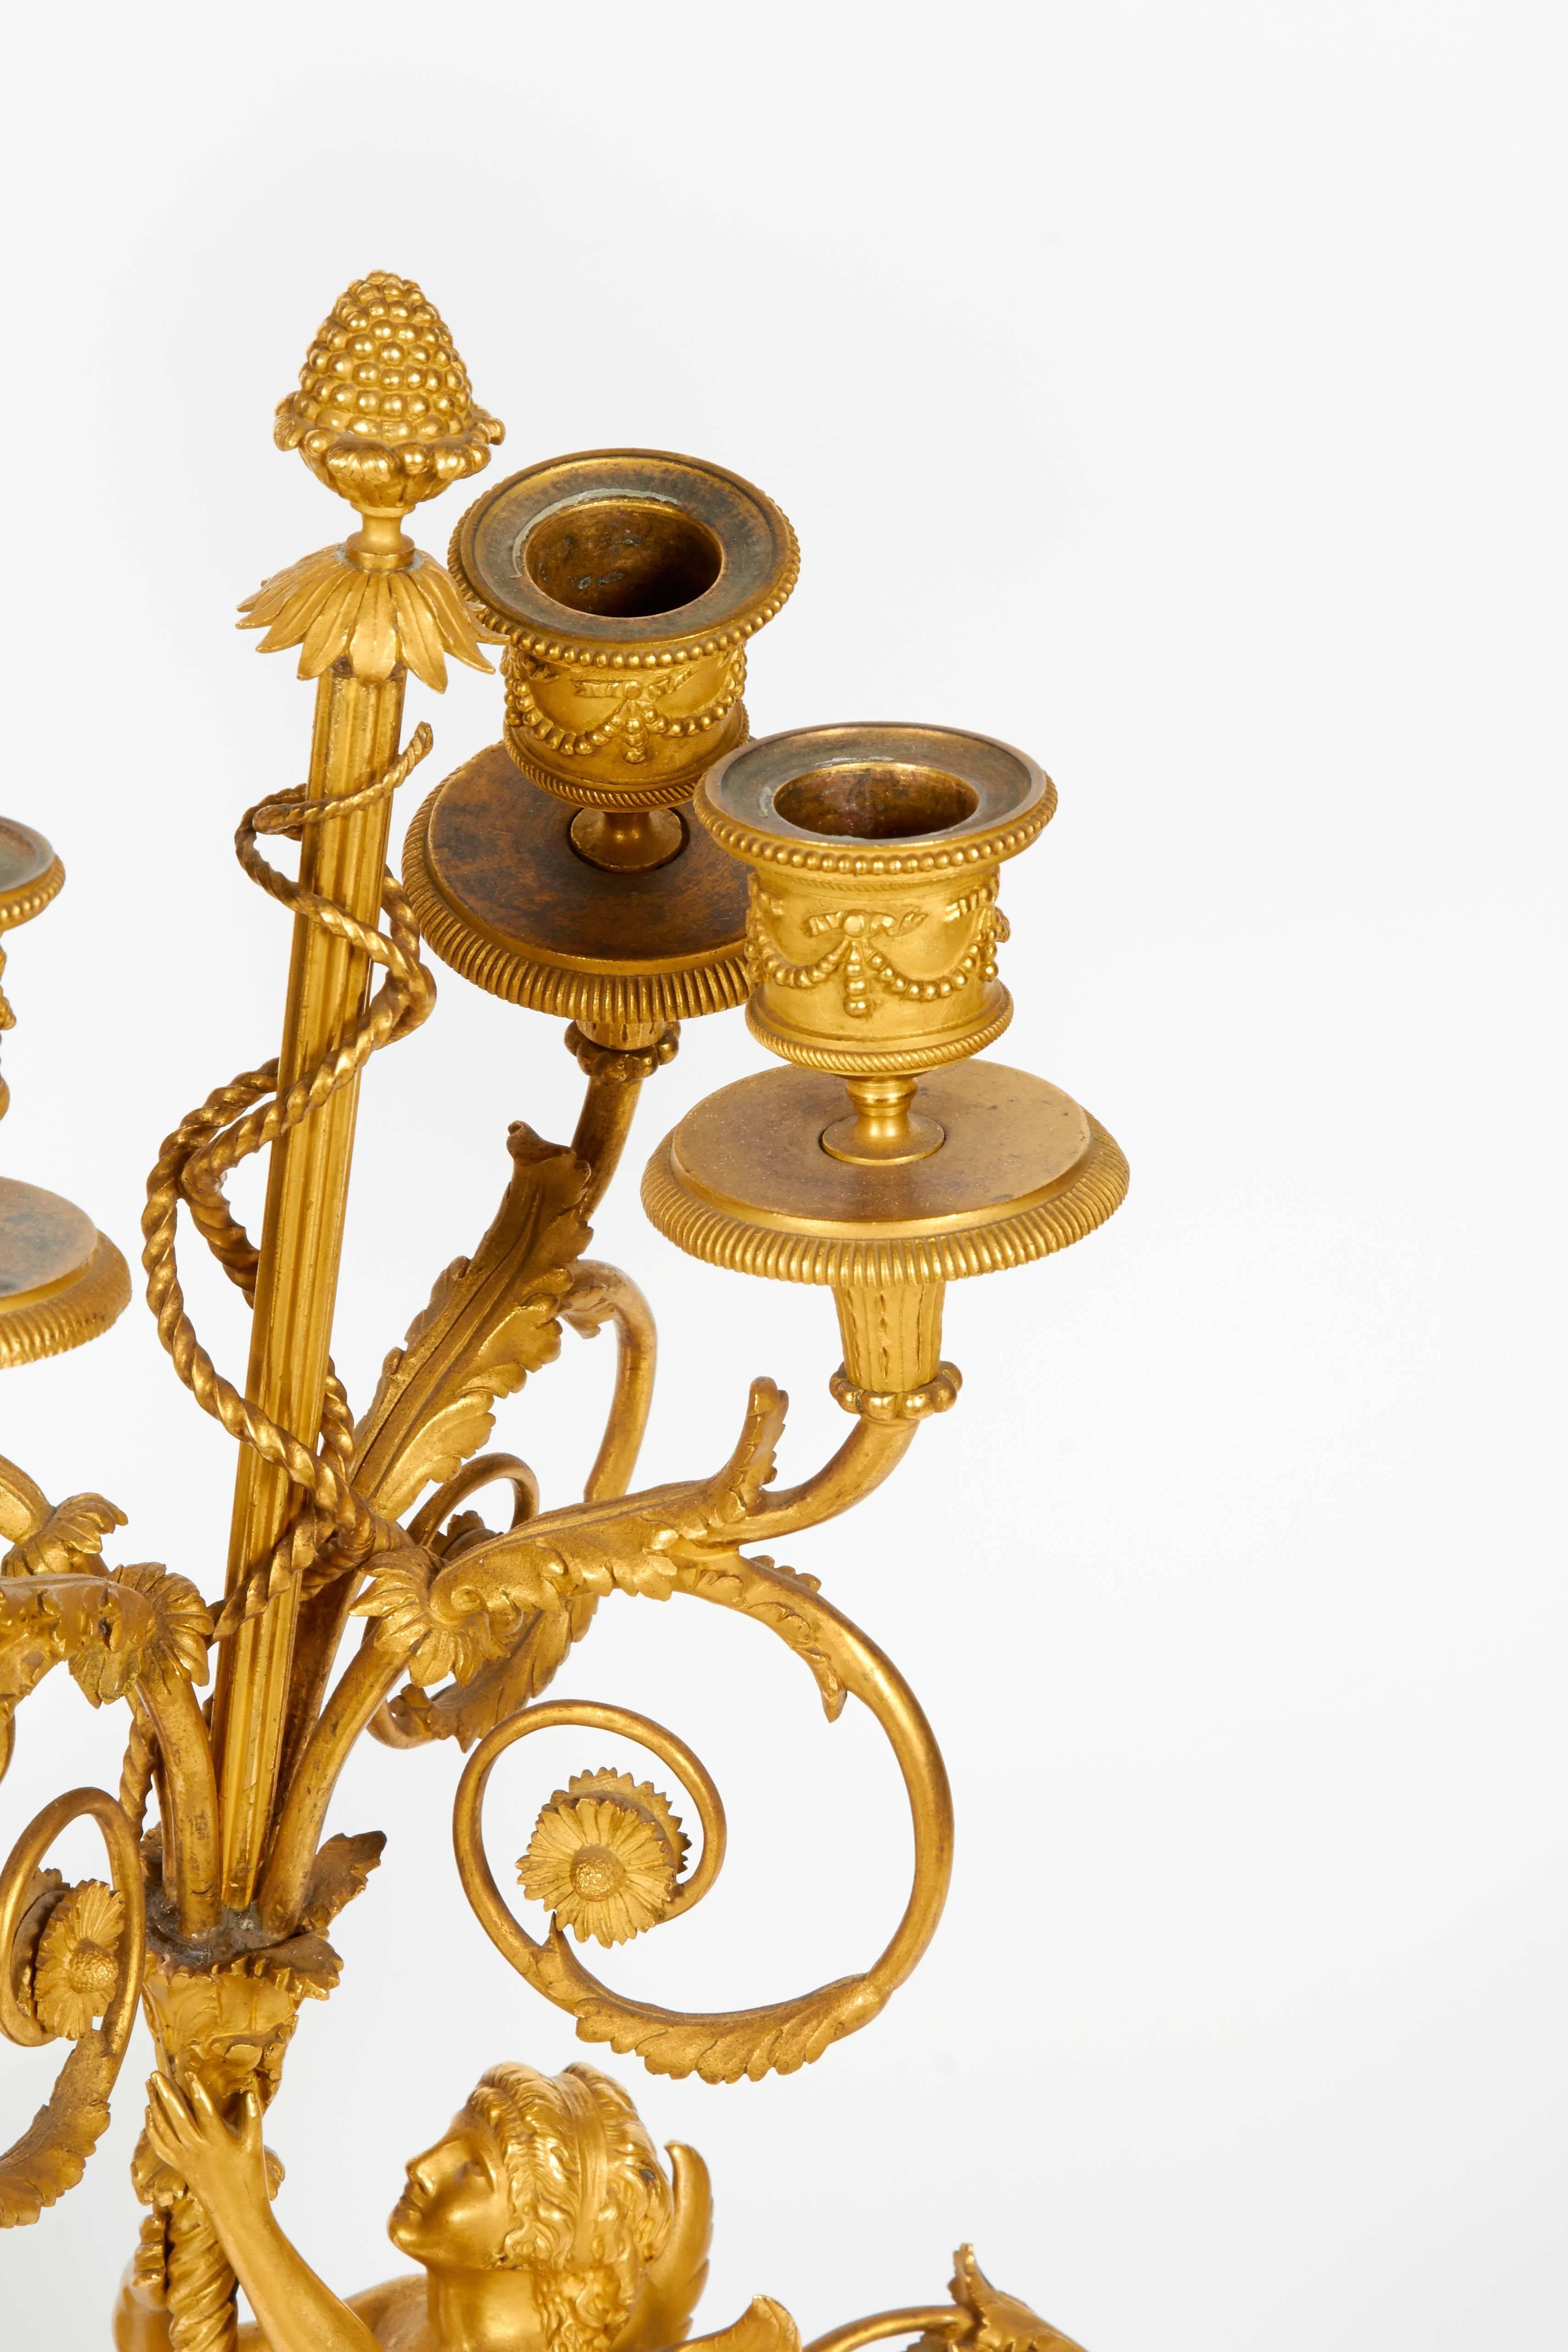 Very exquisite pair of French ormolu candelabra by Louis-Auguste-Alfred Beurdeley, (French, 1847-1919), circa 1880.

After the celebrated model by François Rémond.

Centered by jasper ware / wedgewood medallions to front and back. One with incised